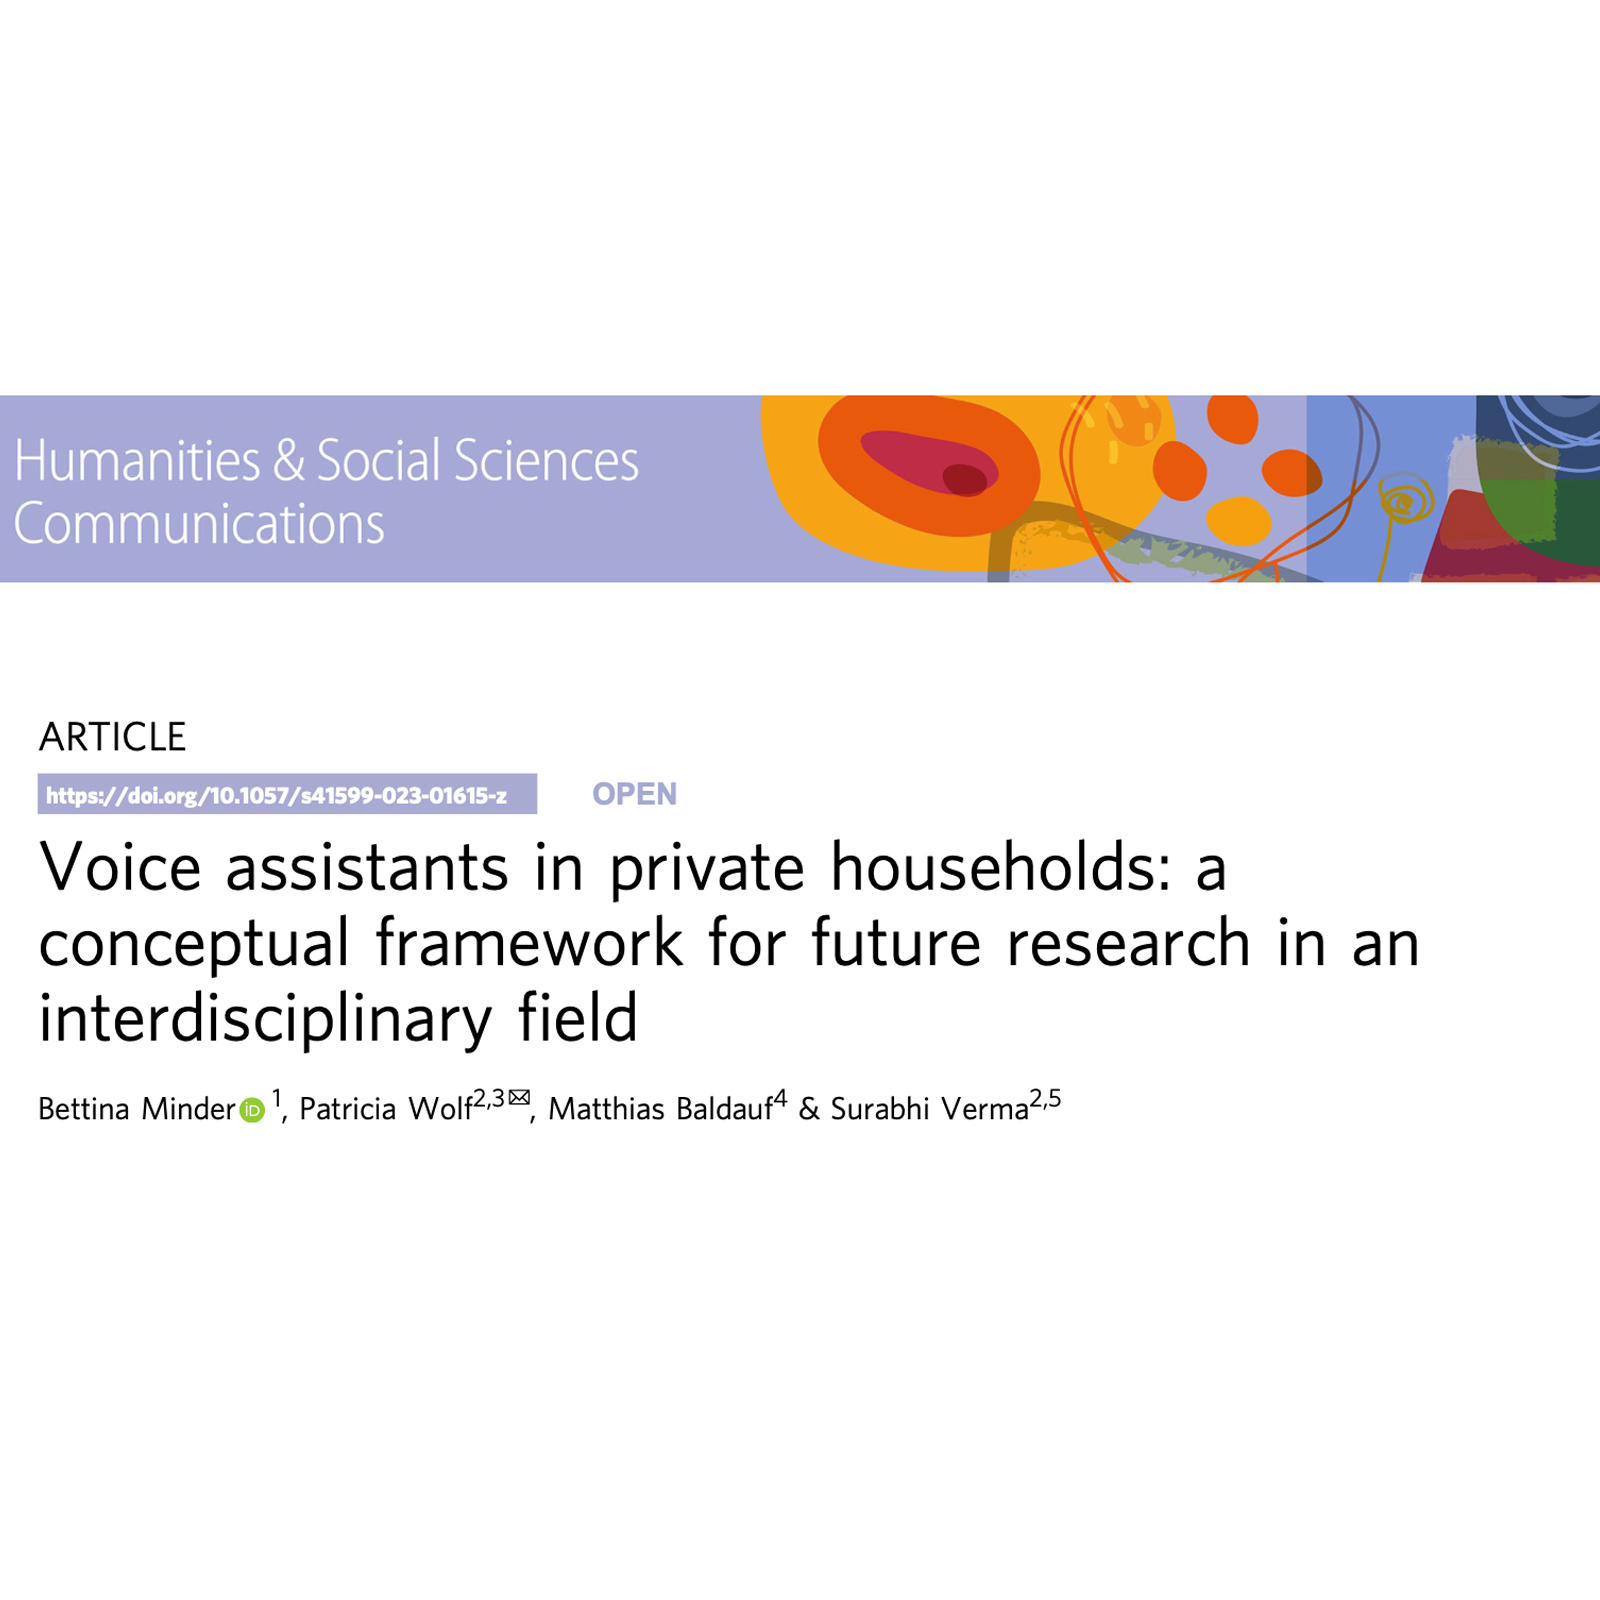 voice-assistants-in-private-households-a-conceptual-framework-for-future-research-in-an-interdisciplinary-field